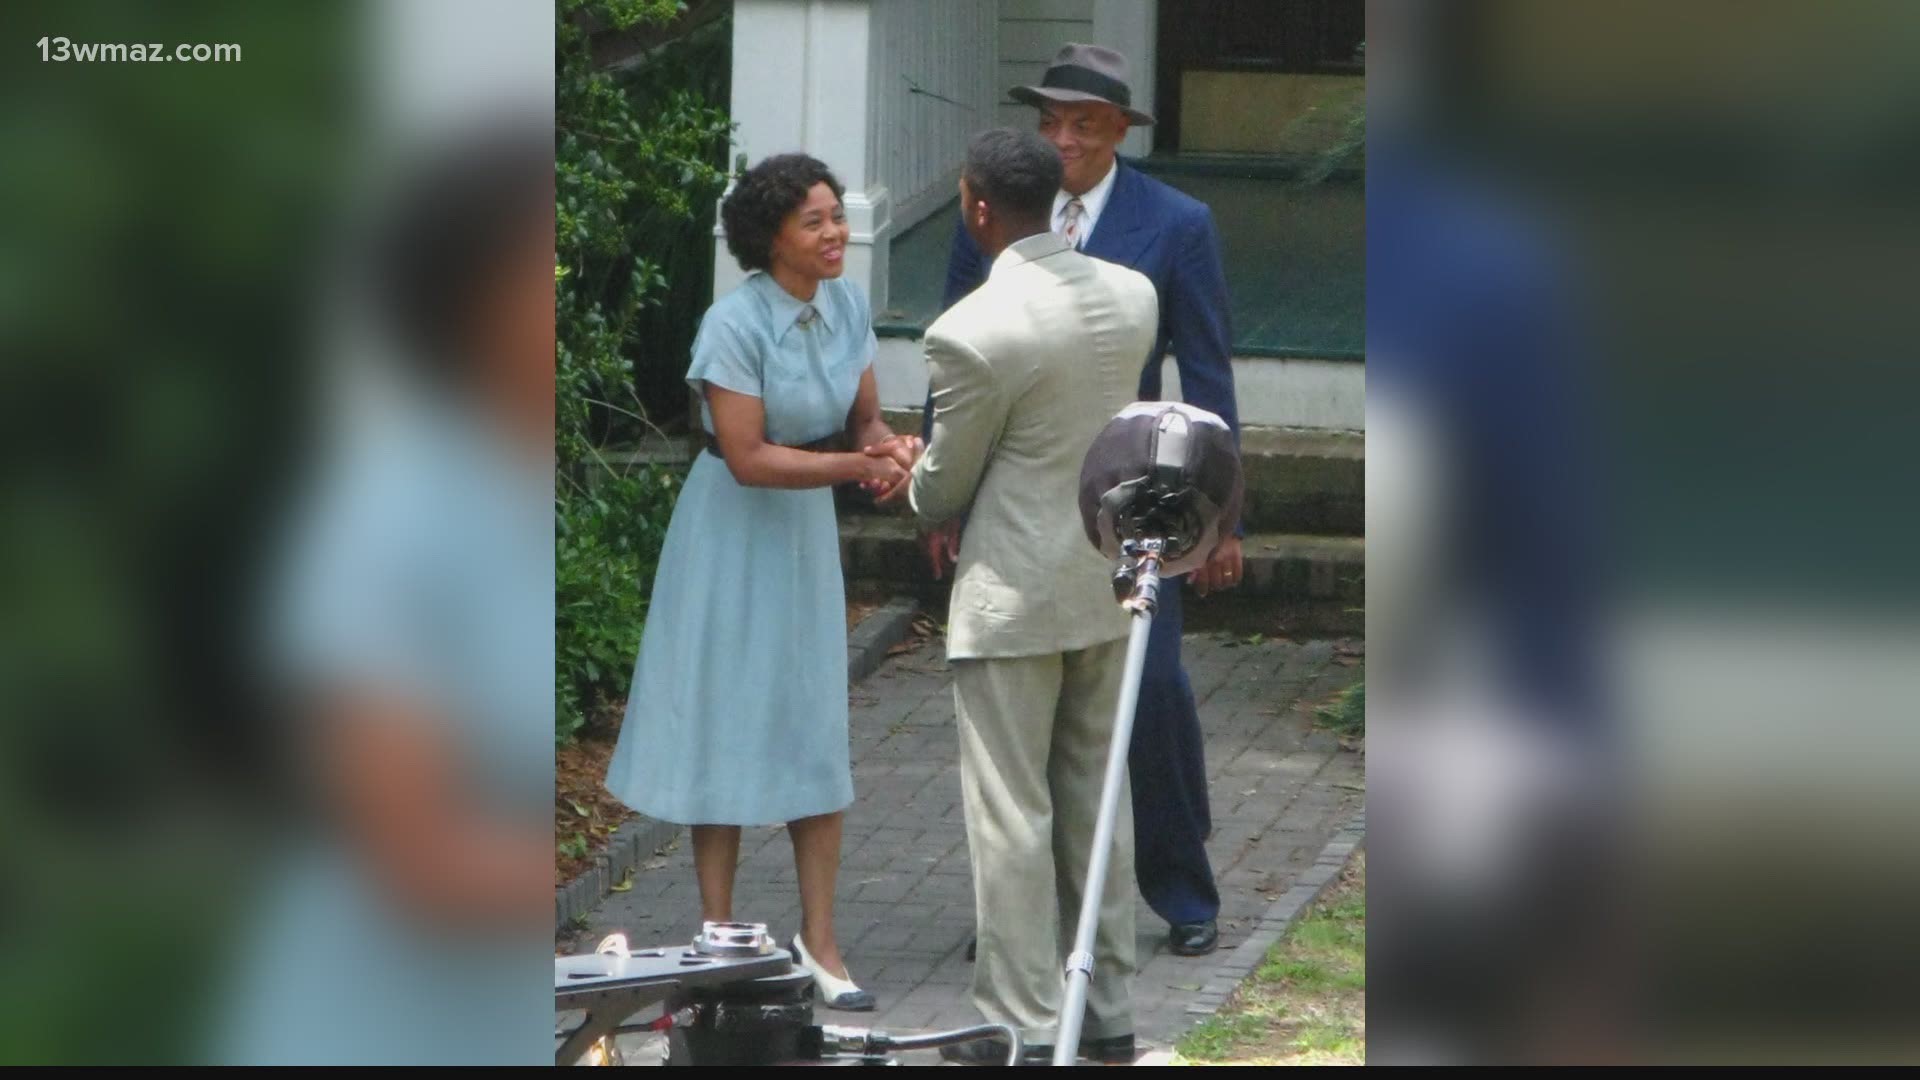 The star came to Macon back in 2012 to film the Jackie Robinson biopic.